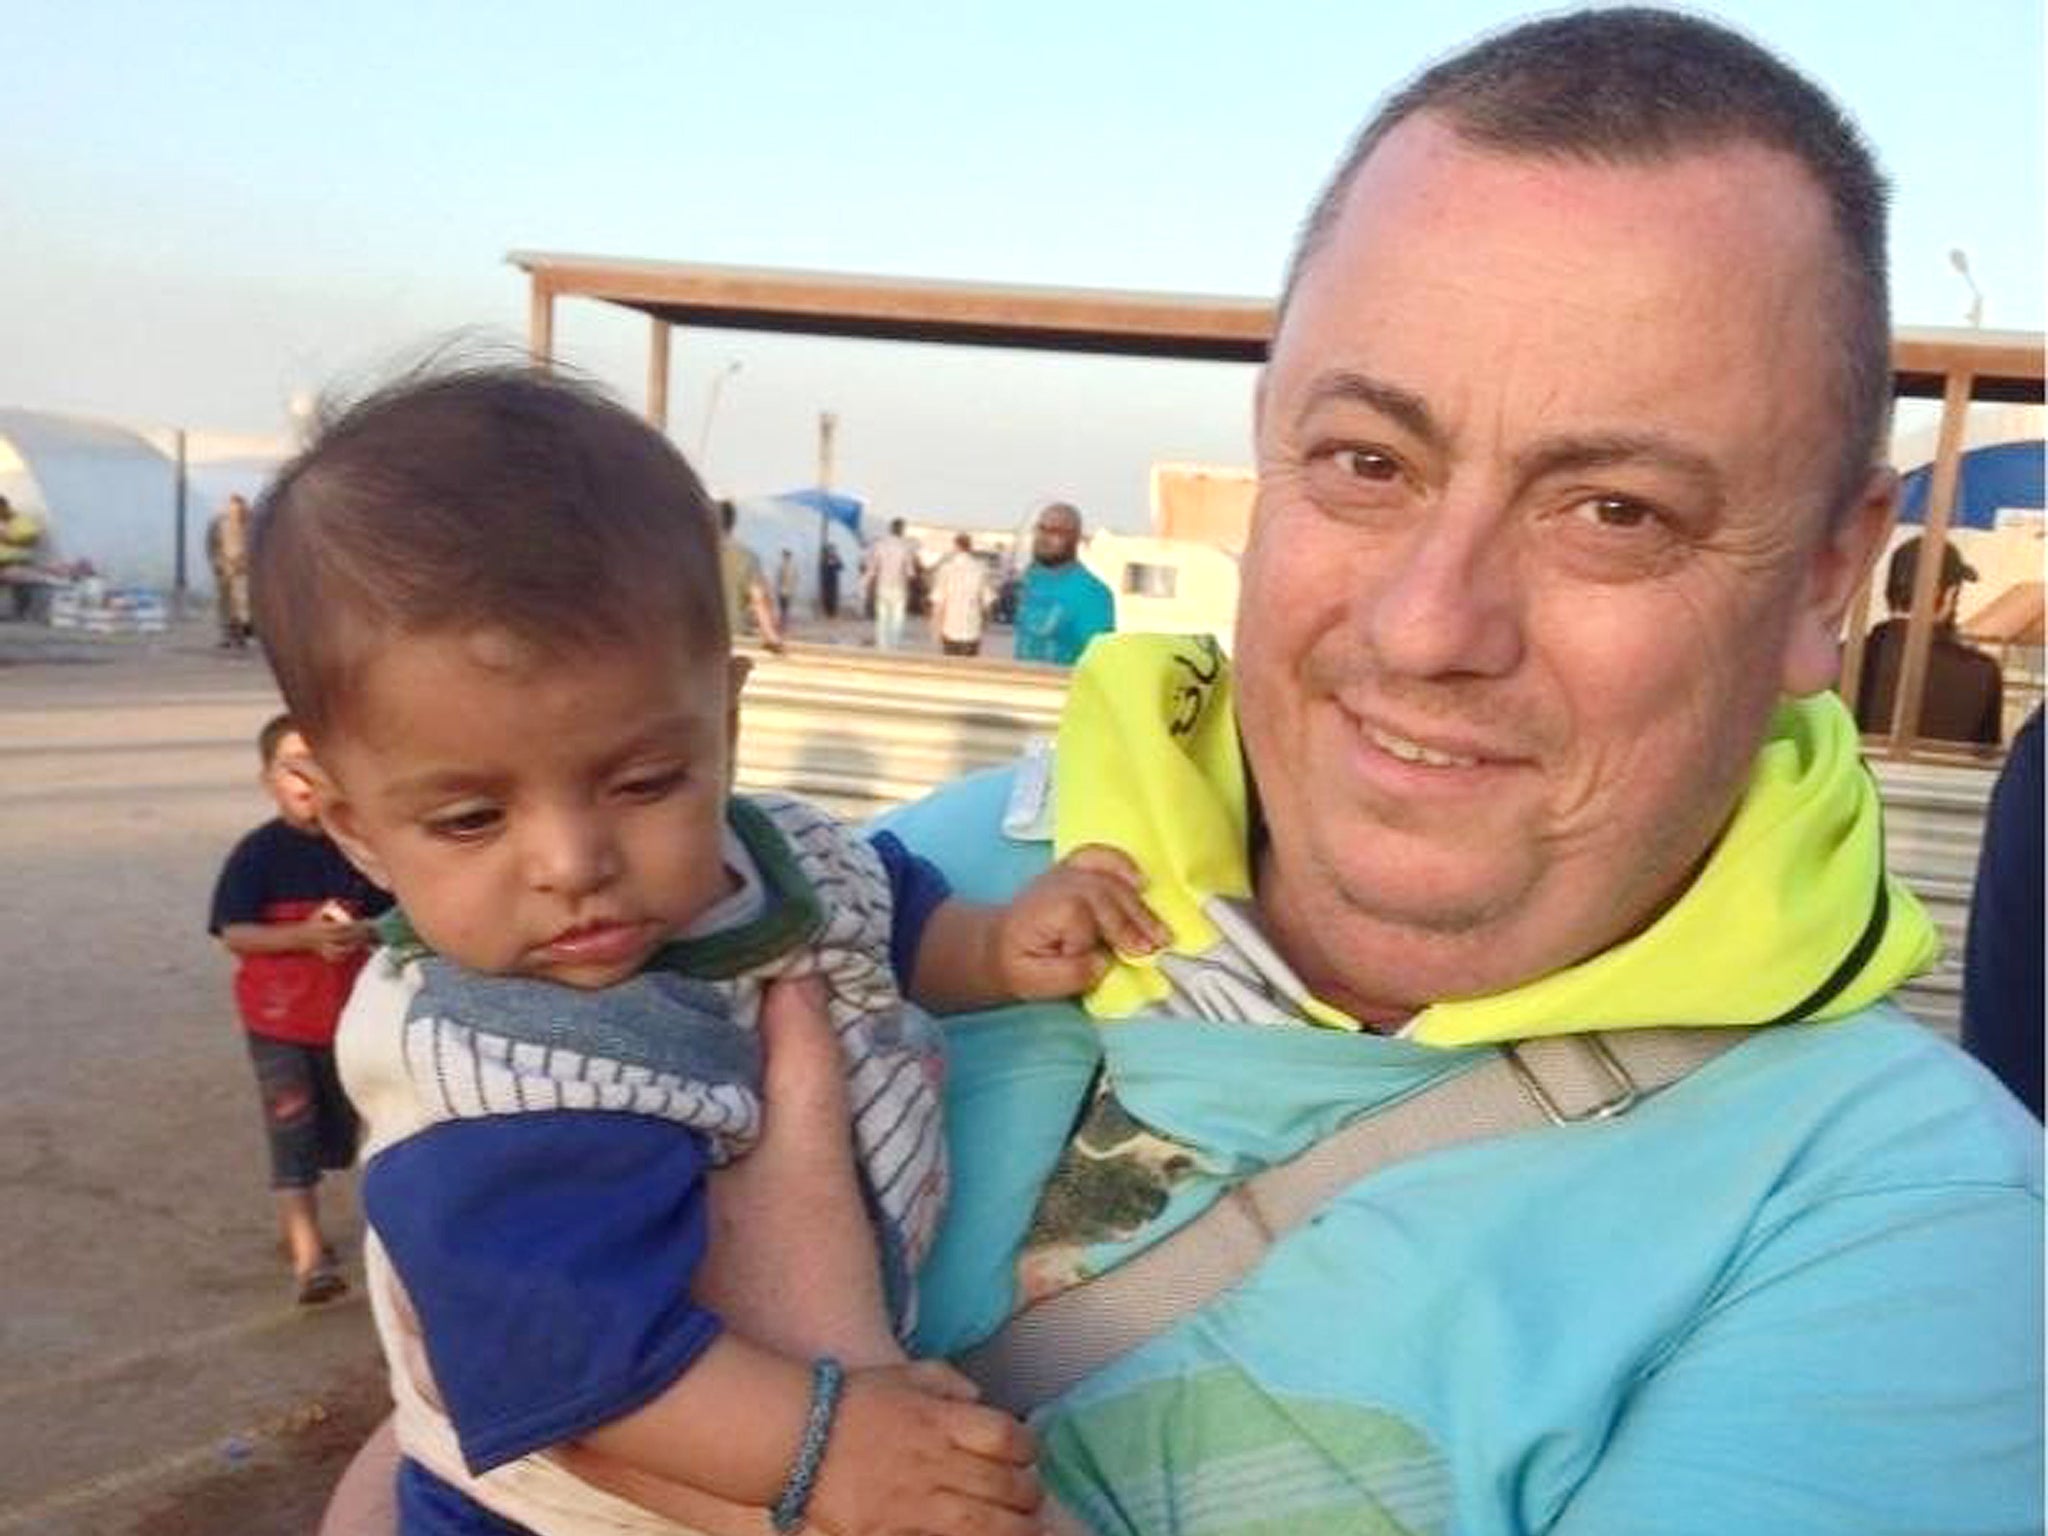 A memorial service is due to be held in Manchester this evening for murdered British aid worker Alan Henning